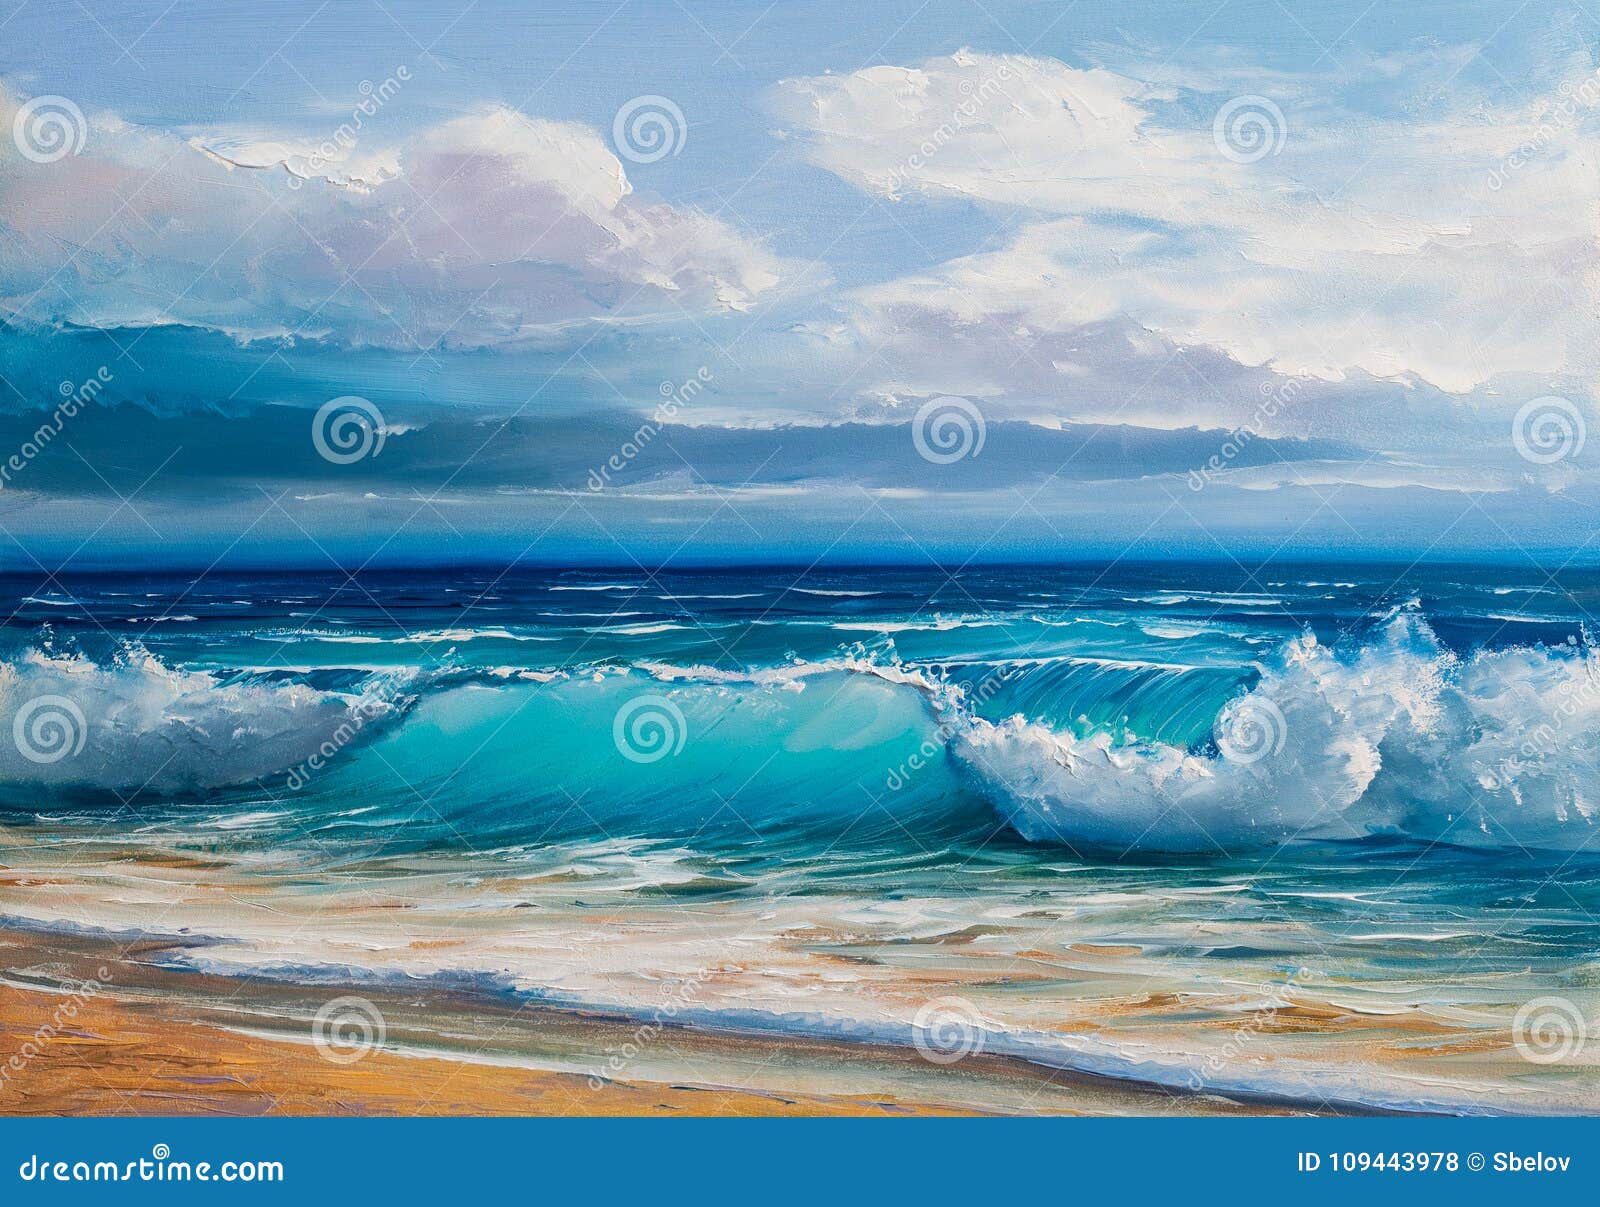 oil painting of the sea on canvas.